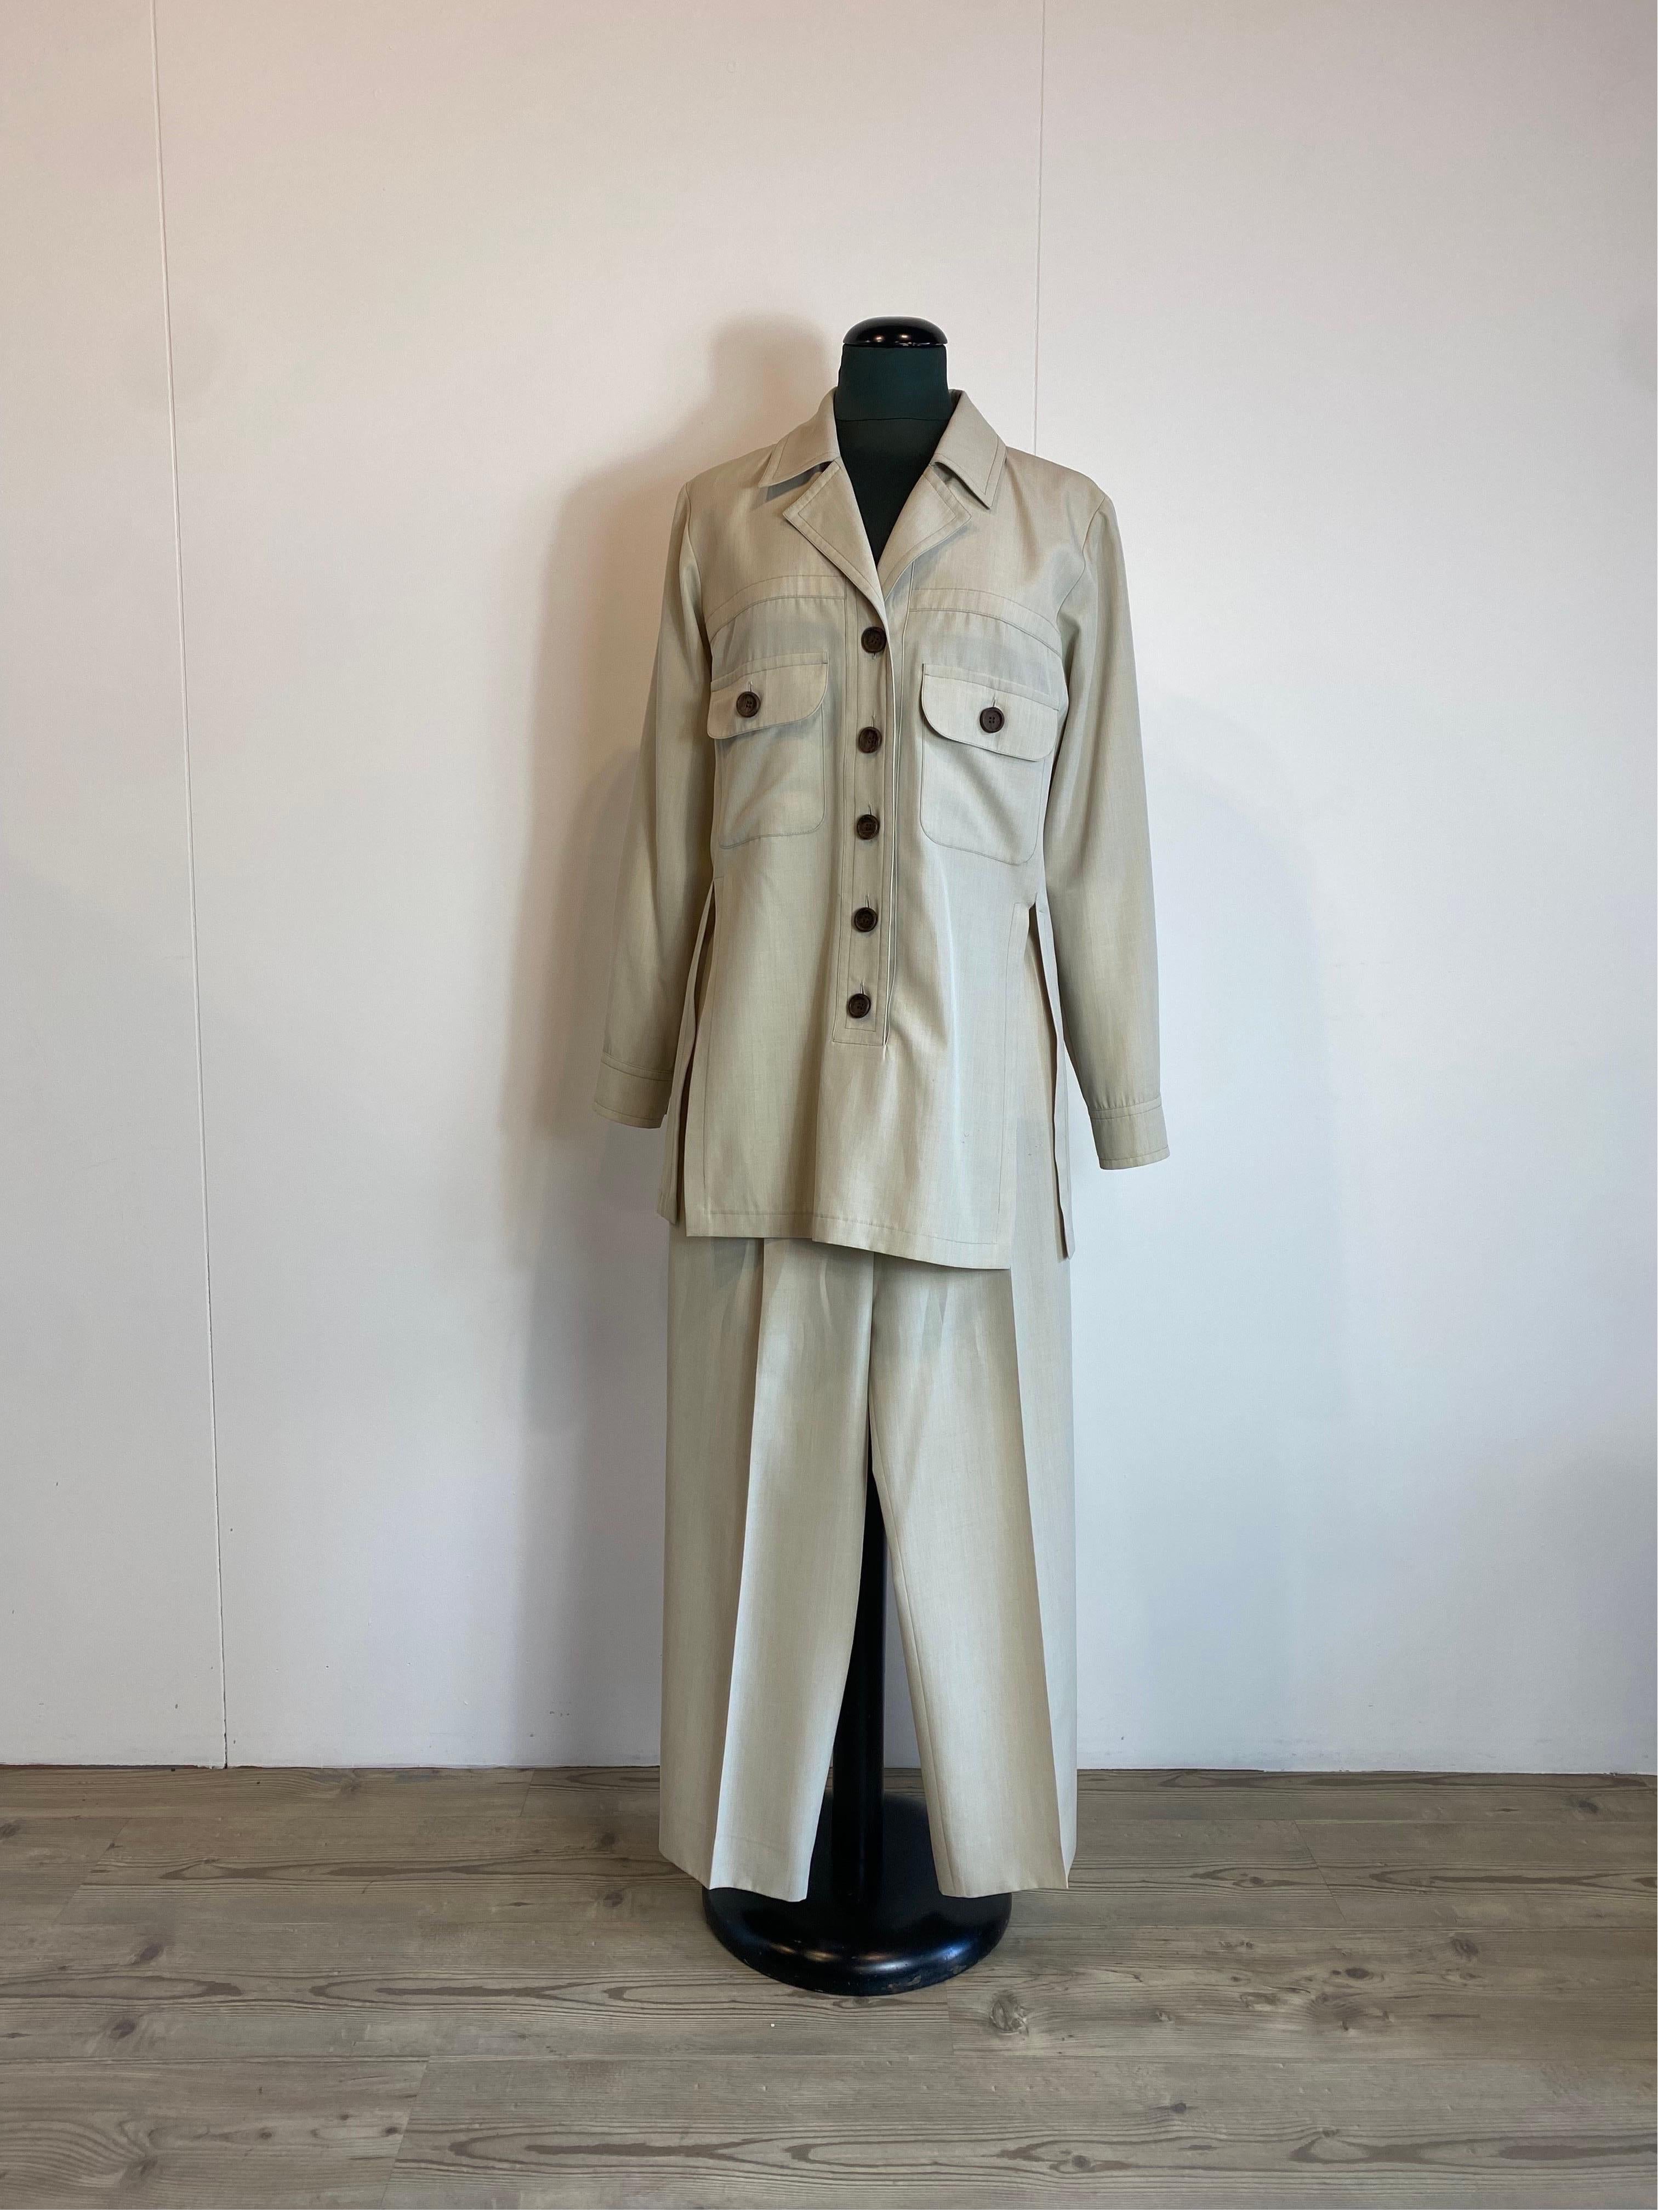 Yves Saint Laurent Variation suit.
Iconic Saharan jacket.
In rayon. It features wooden buttons.
Two high side slits.
French size 36 which corresponds to an Italian 40
Shoulders 42 cm
Length 78 cm
Sleeve 62 cm
Bust 40 cm
Rayon trousers with front